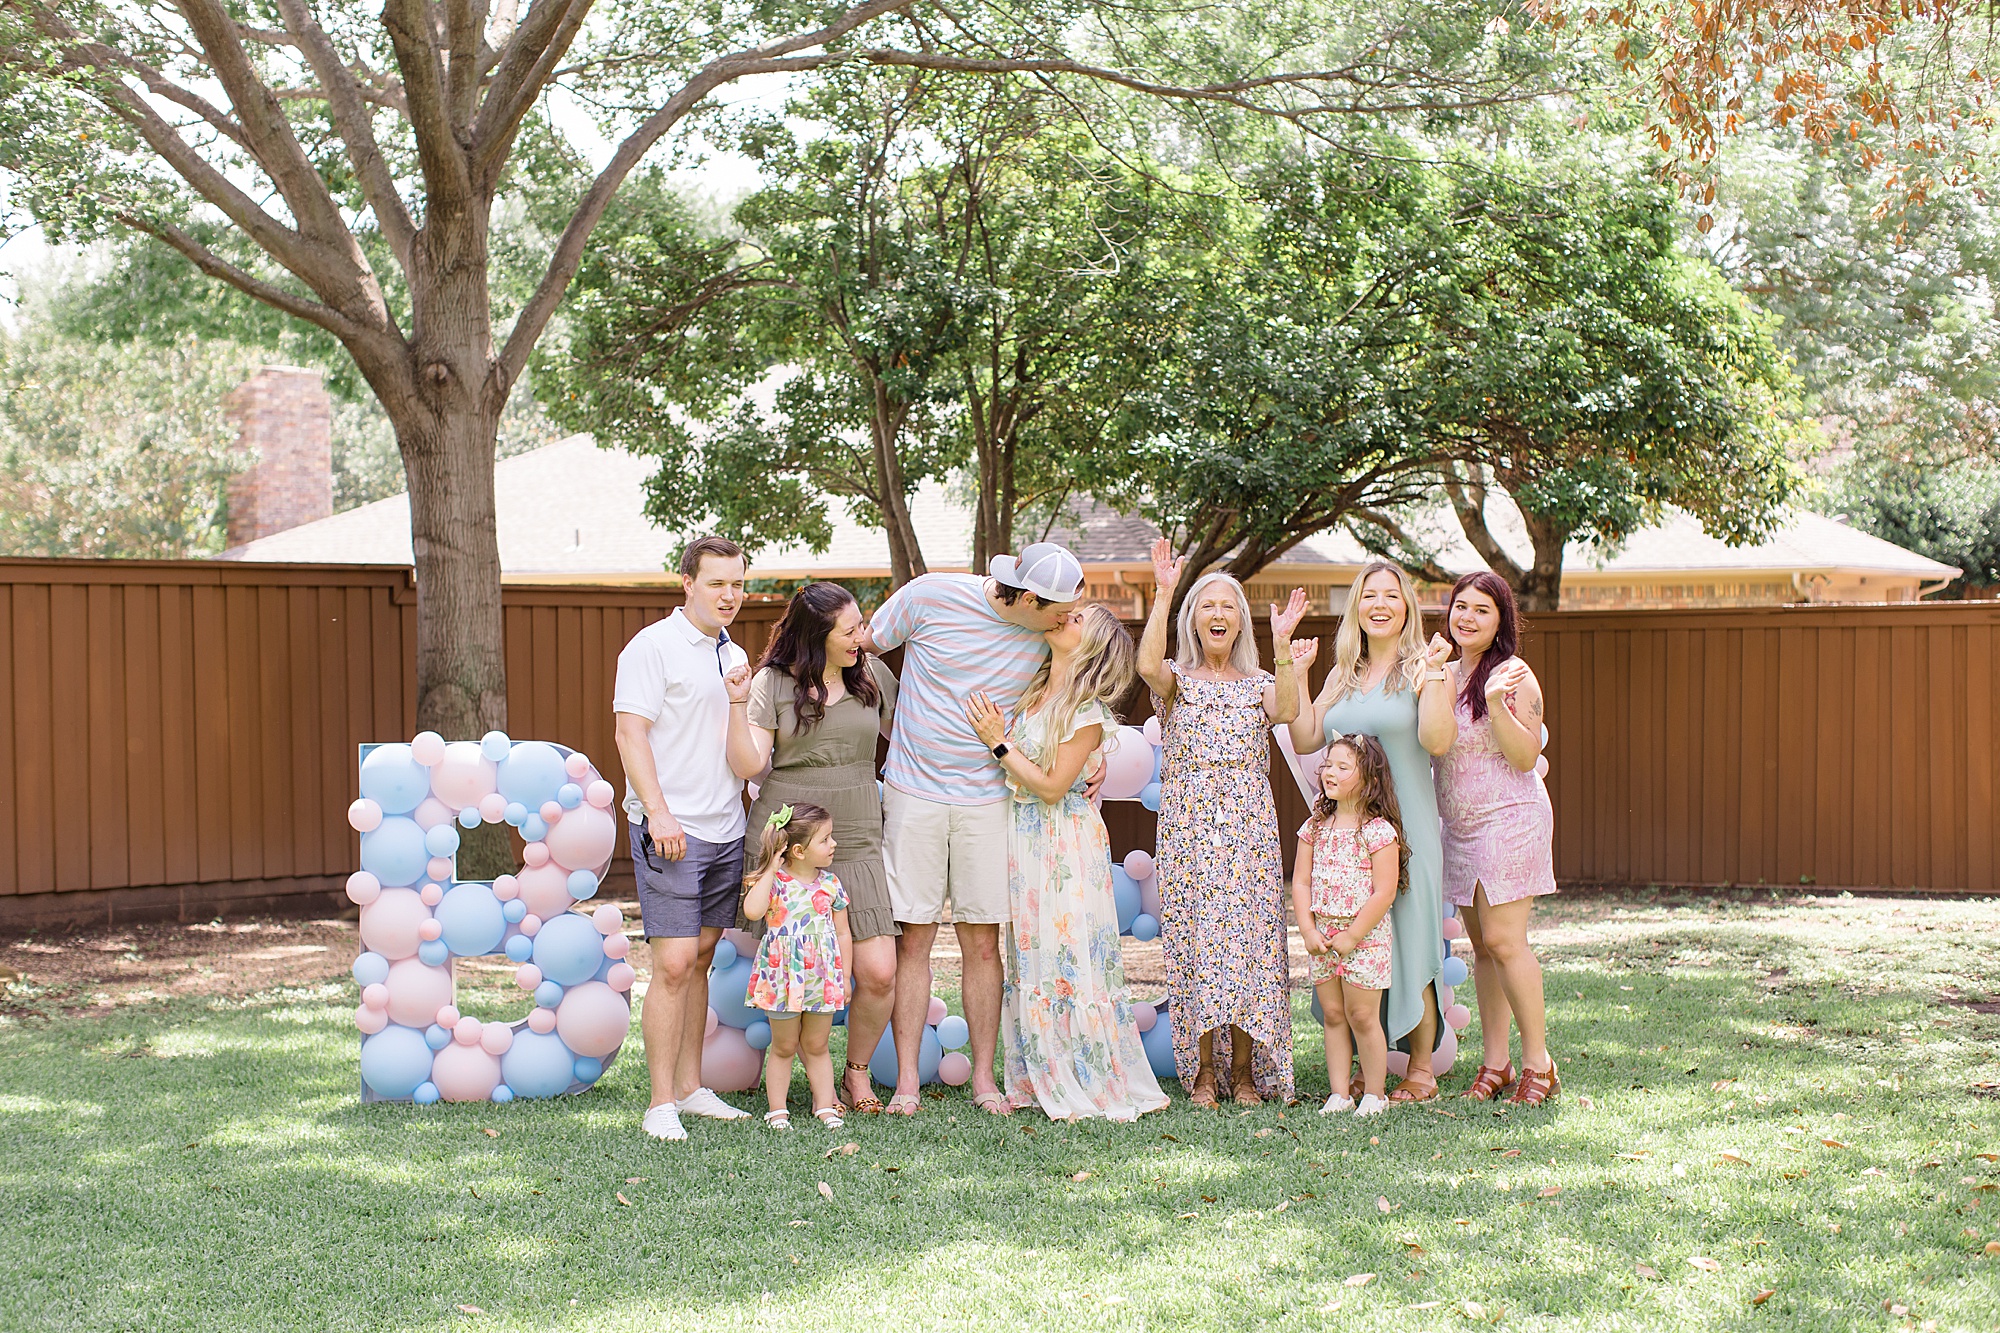 couple kisses with family surrounding them during gender reveal party